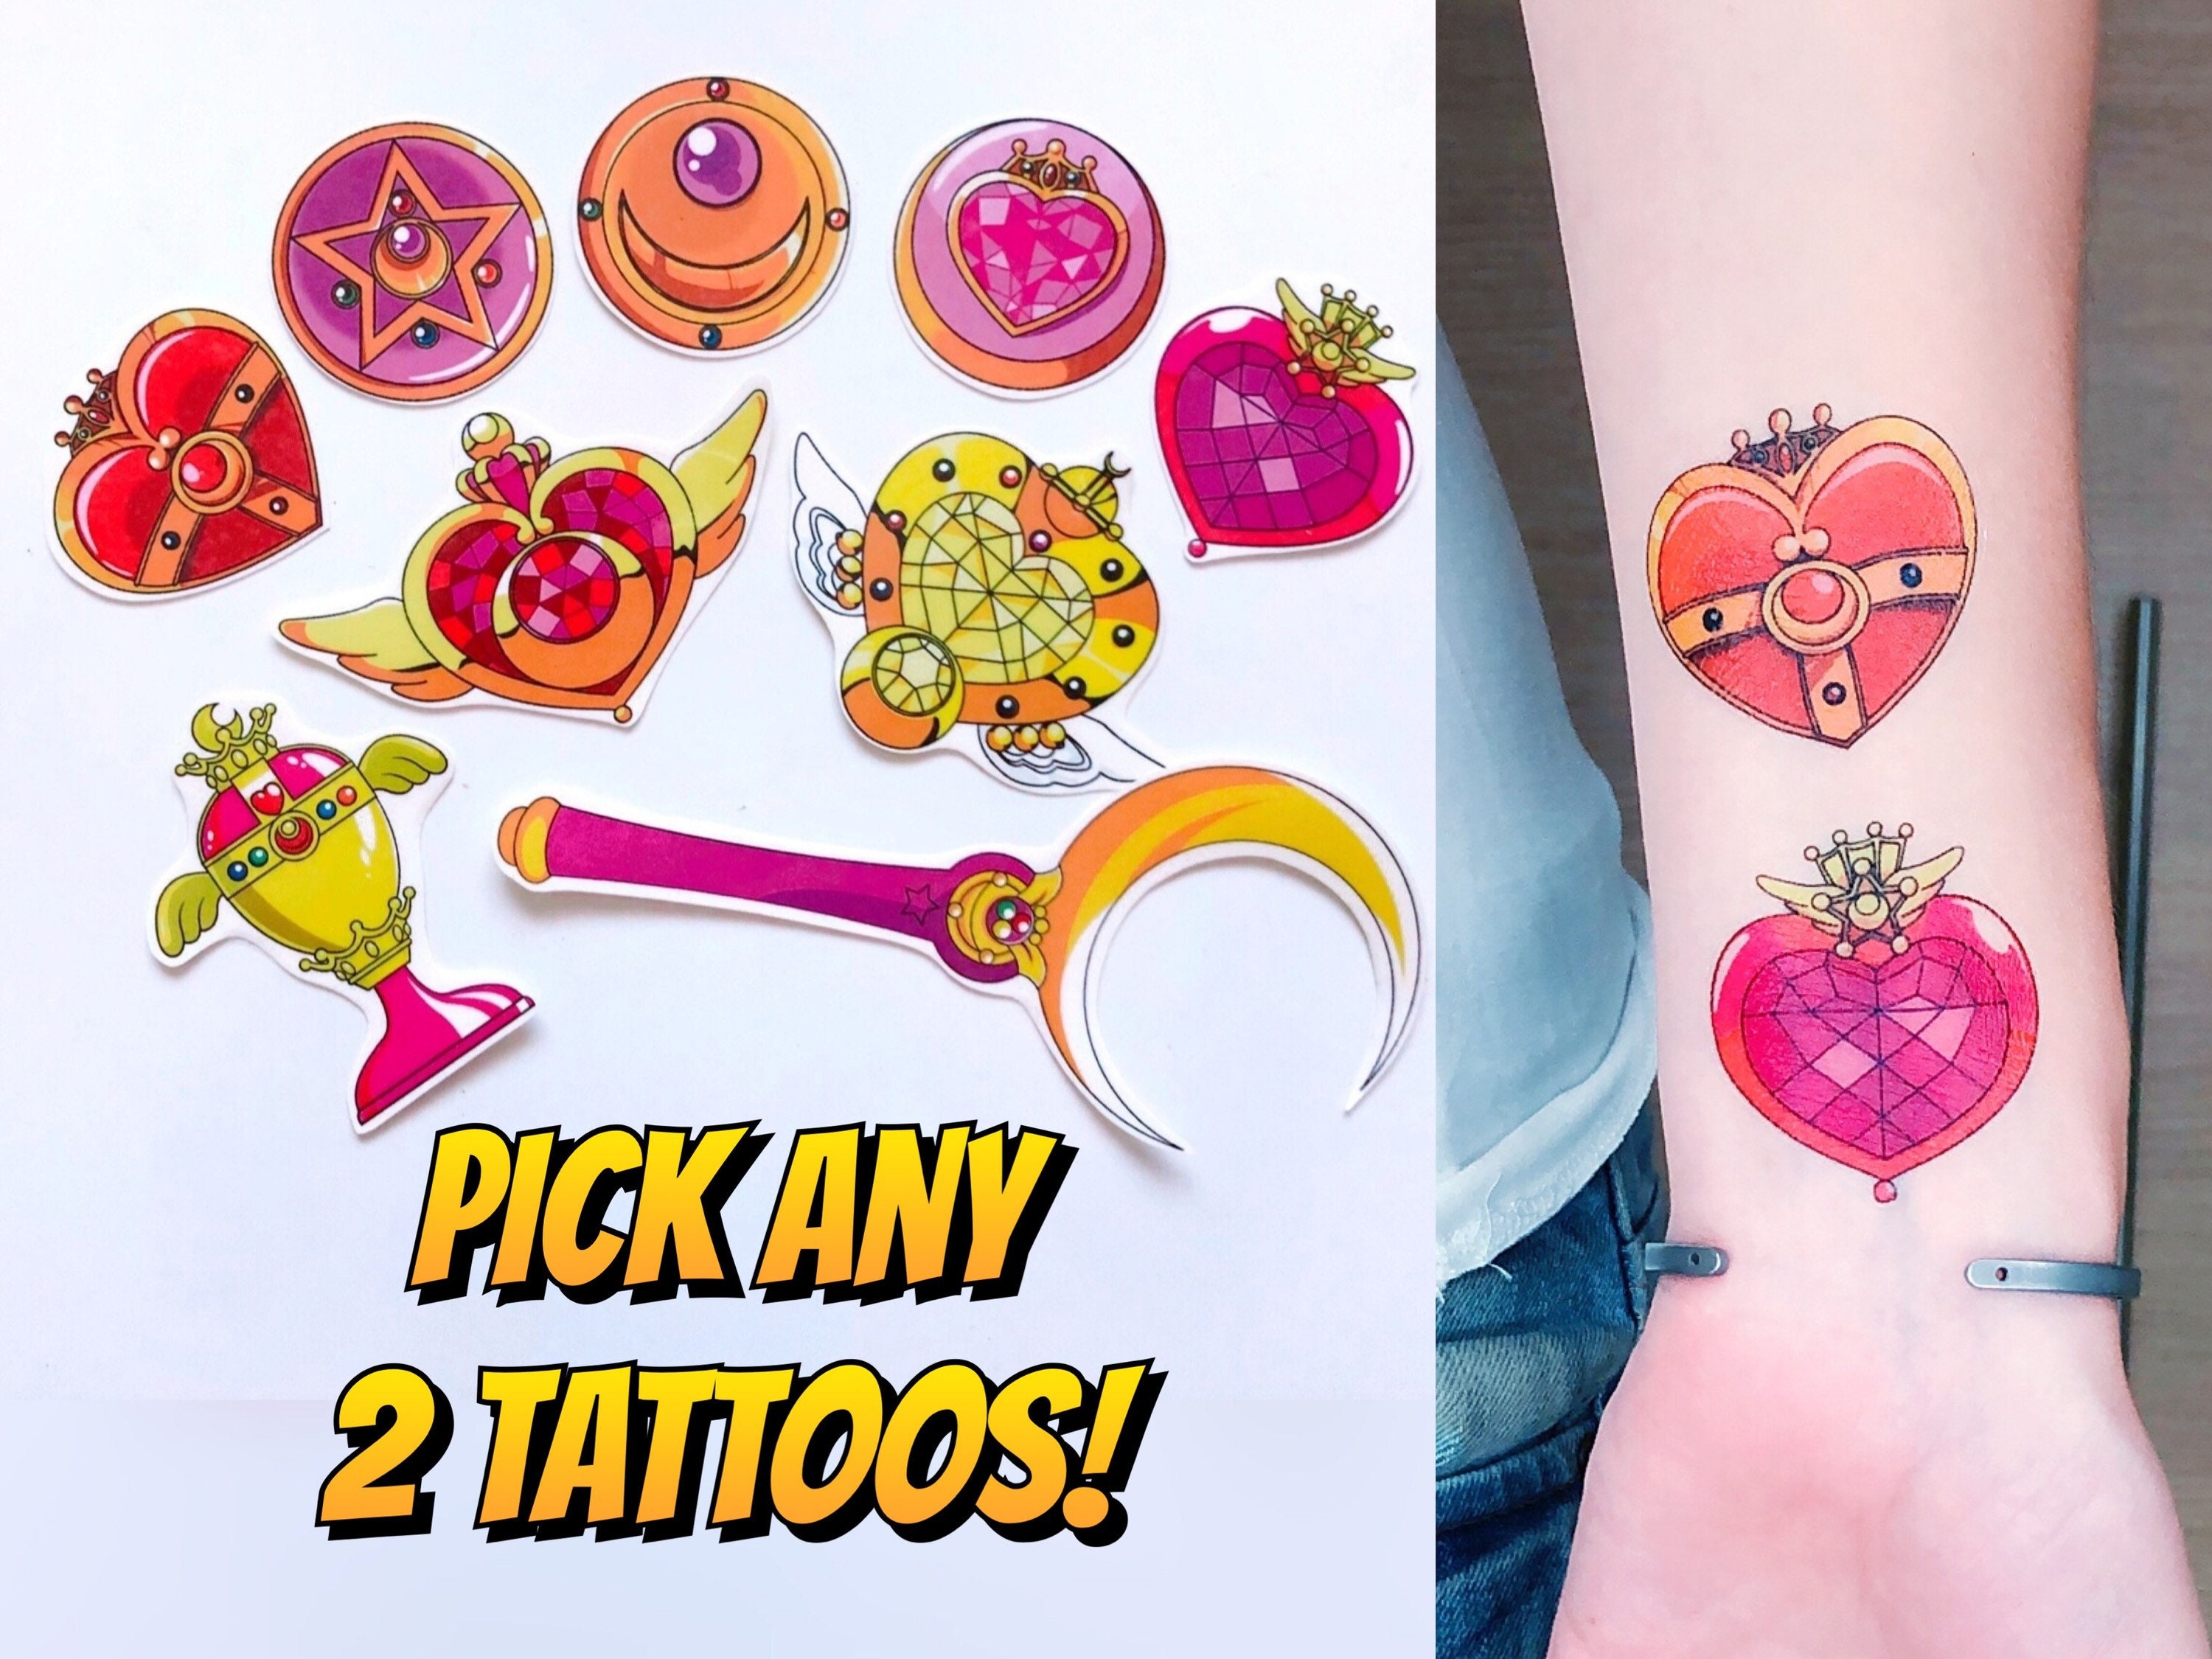 Water Transfer Tattoo Cute Sailor Moon Angel Heart Magic Wand Art  Waterproof Temporary Flash Tatto Fake Tattoo for Kids Woman - Price history  & Review | AliExpress Seller - 7-ink Store | Alitools.io